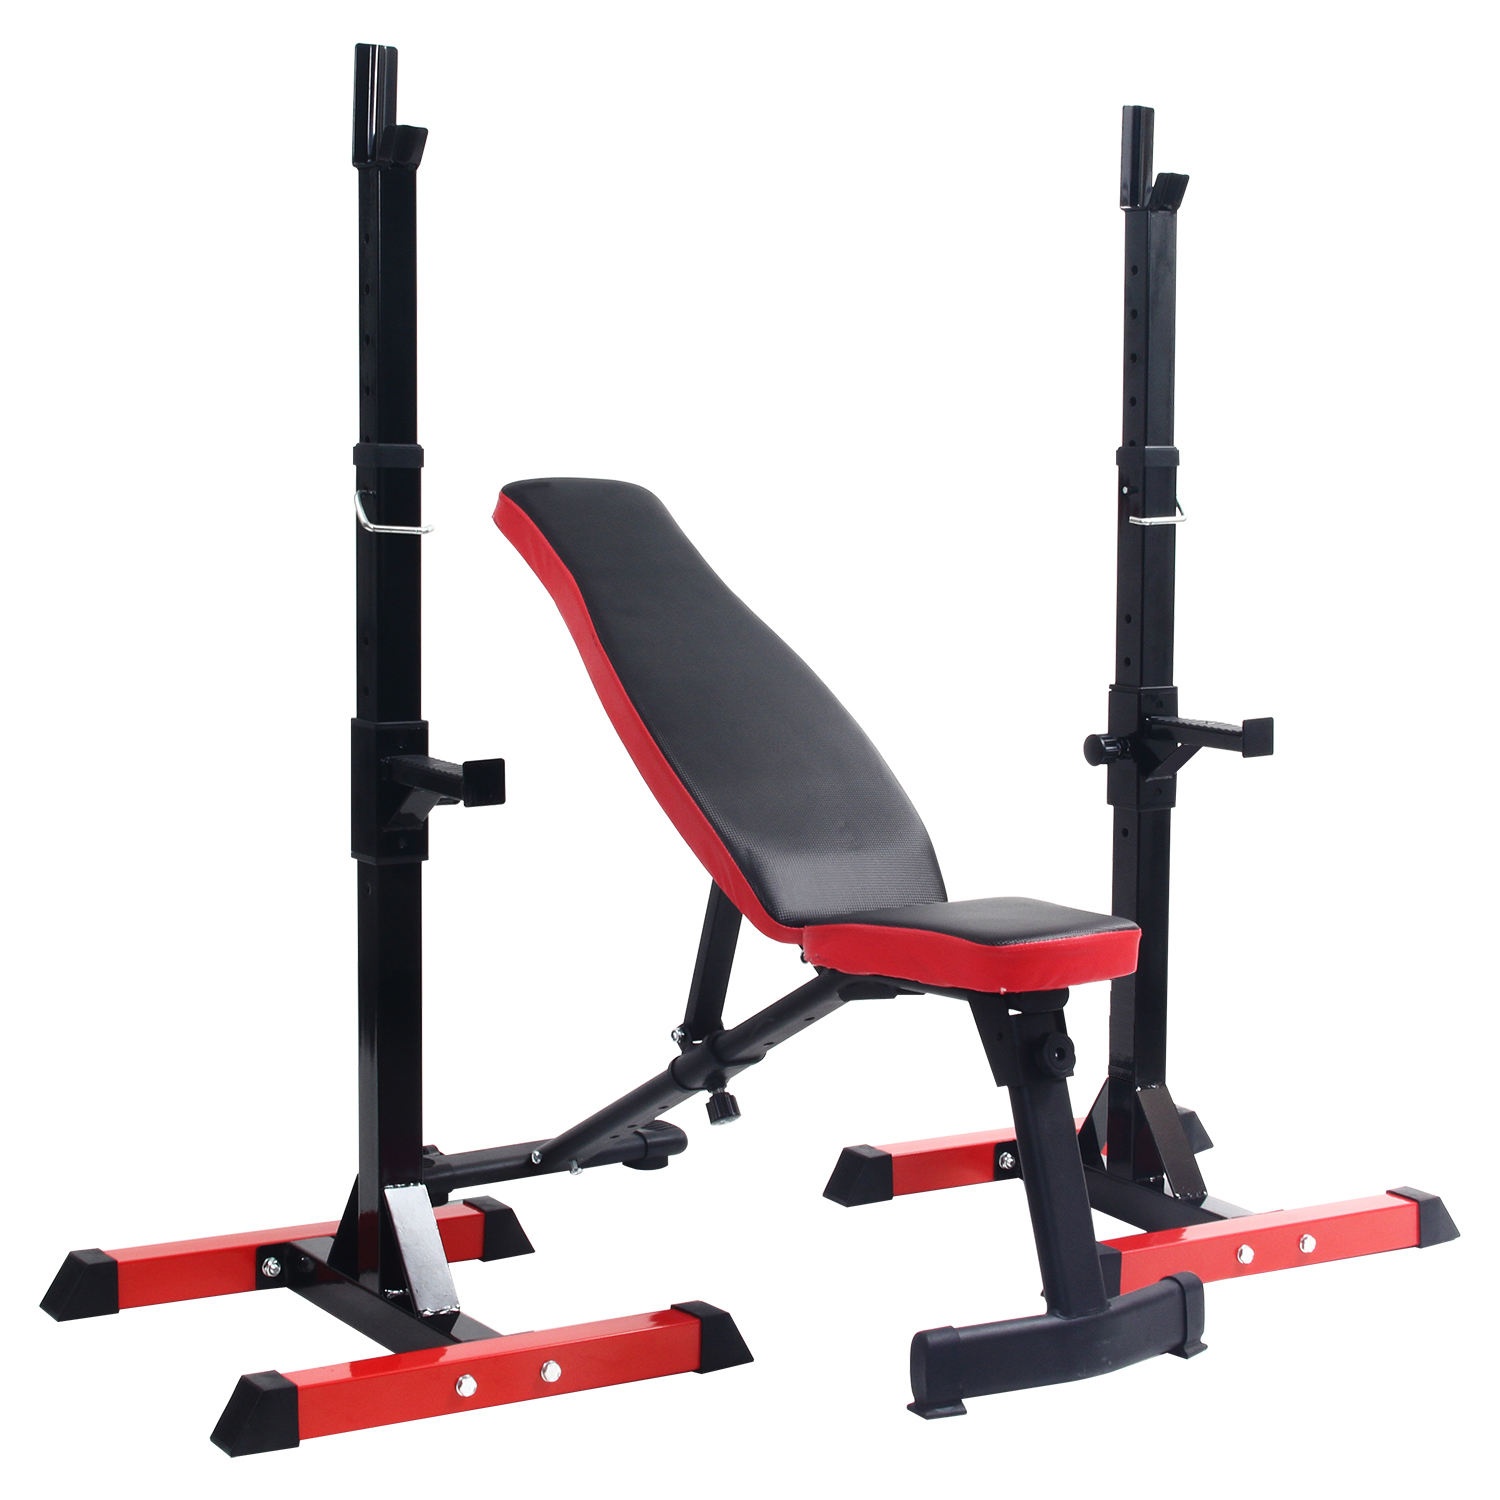 Adjustable squatting frame for weight lifting strength training in Gymnasium